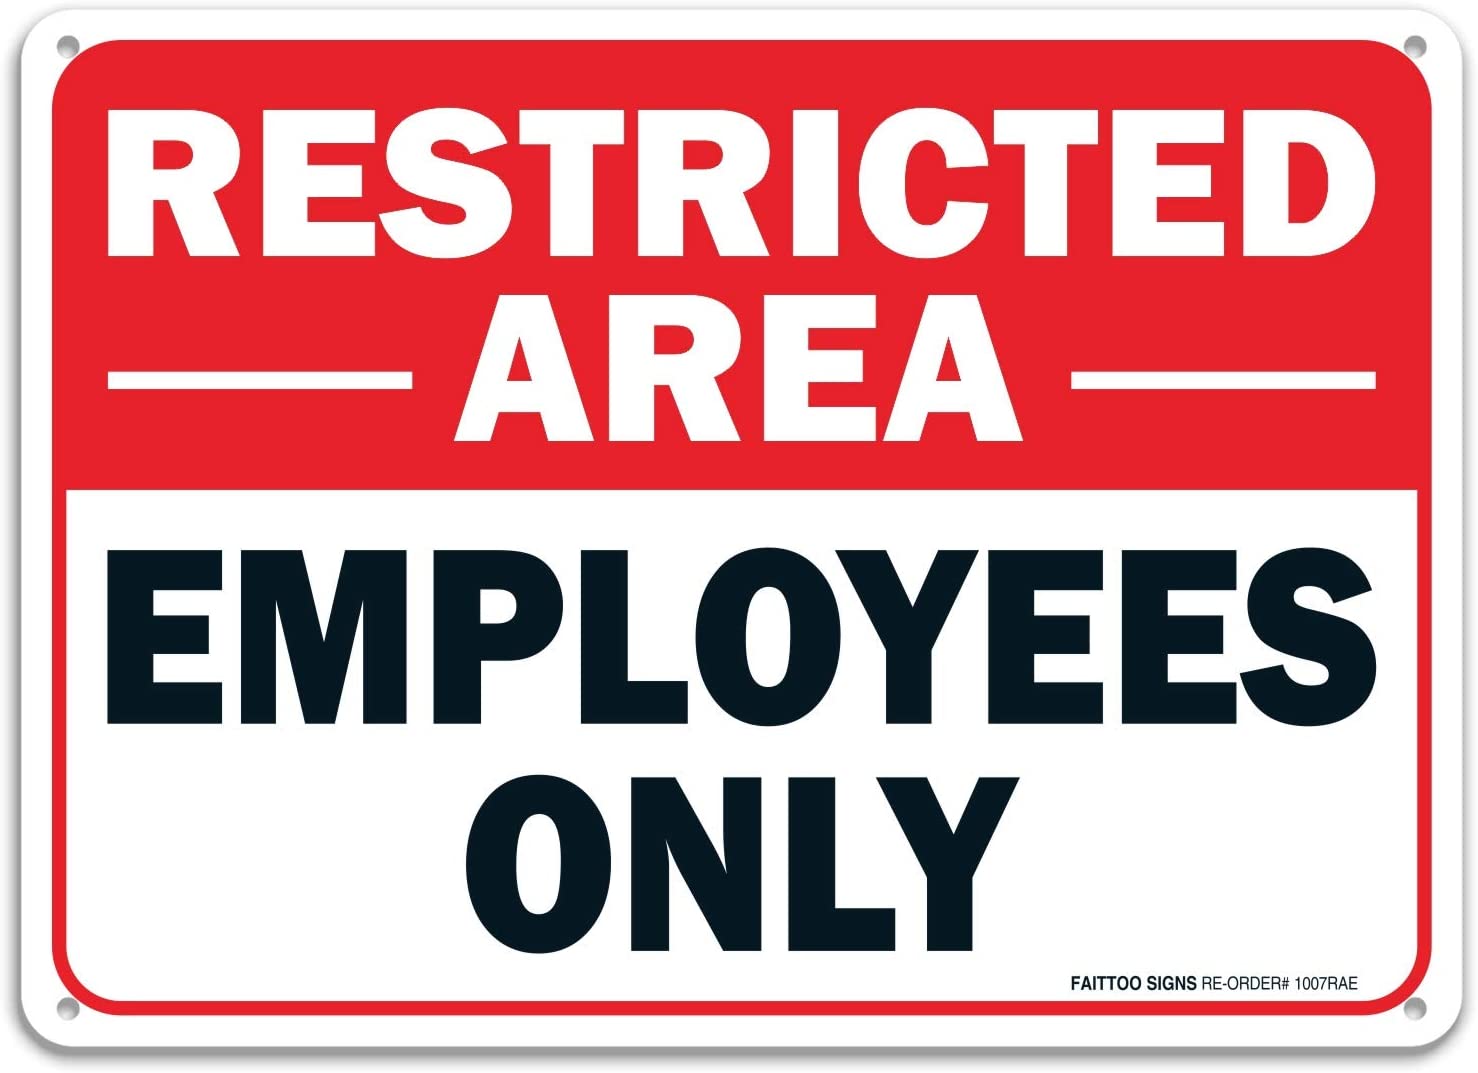 Faittoo Restricted Area Employees Only Sign, 10 x 7 Inches .40 Rust Free Aluminum , UV Protected, Weather Resistant, Waterproof, Durable Ink, Easy To Mount